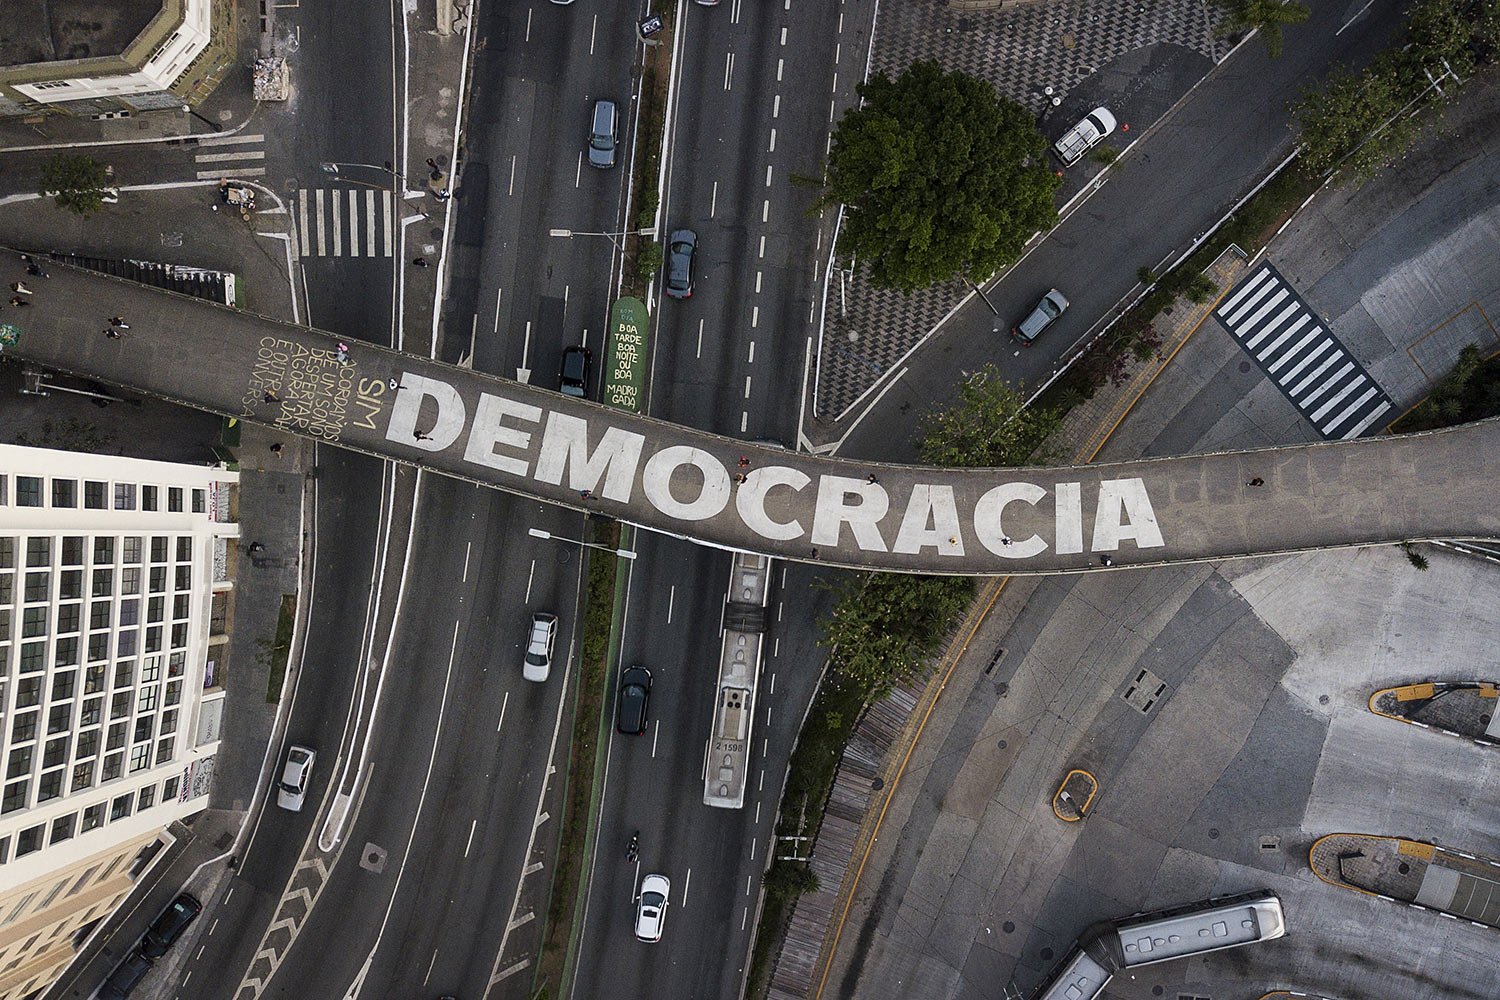  People walk on a pedestrian bridge emblazoned with the Portuguese word for democracy, in Sao Paulo, Brazil, Wednesday, Oct. 26, 2022.  (AP Photo/Matias Delacroix) 